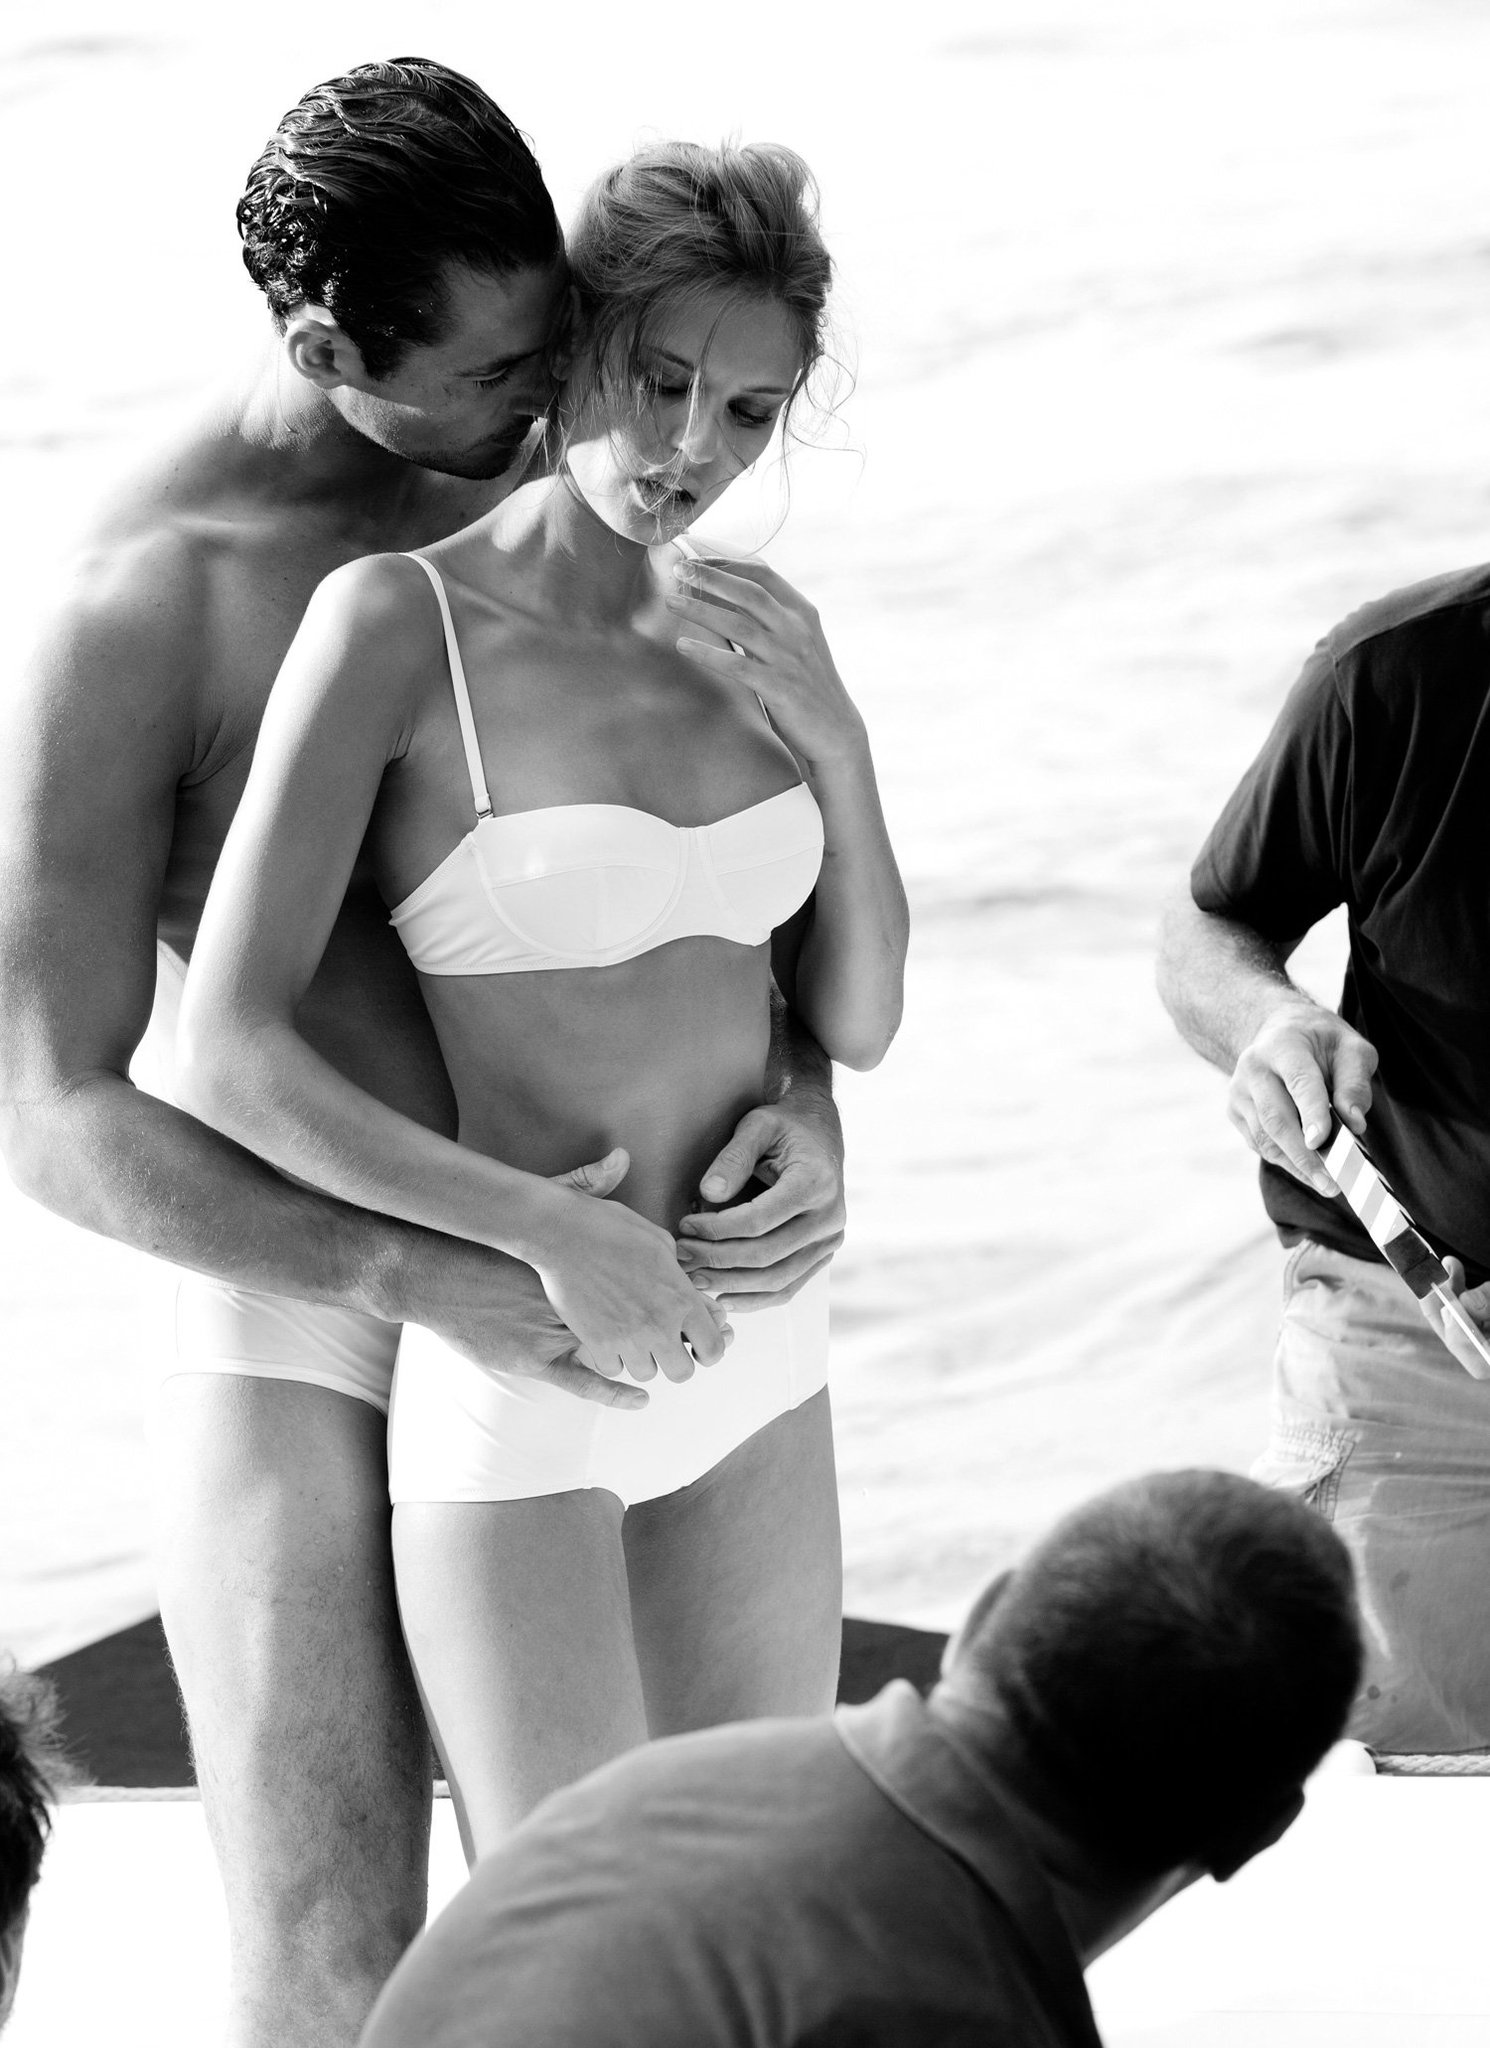 Dolce Gabbana Dglightblue Campaign With David Gandy And Bianca Balti Is Set In Capri New Limited Edition T Co Iqbyvenhog